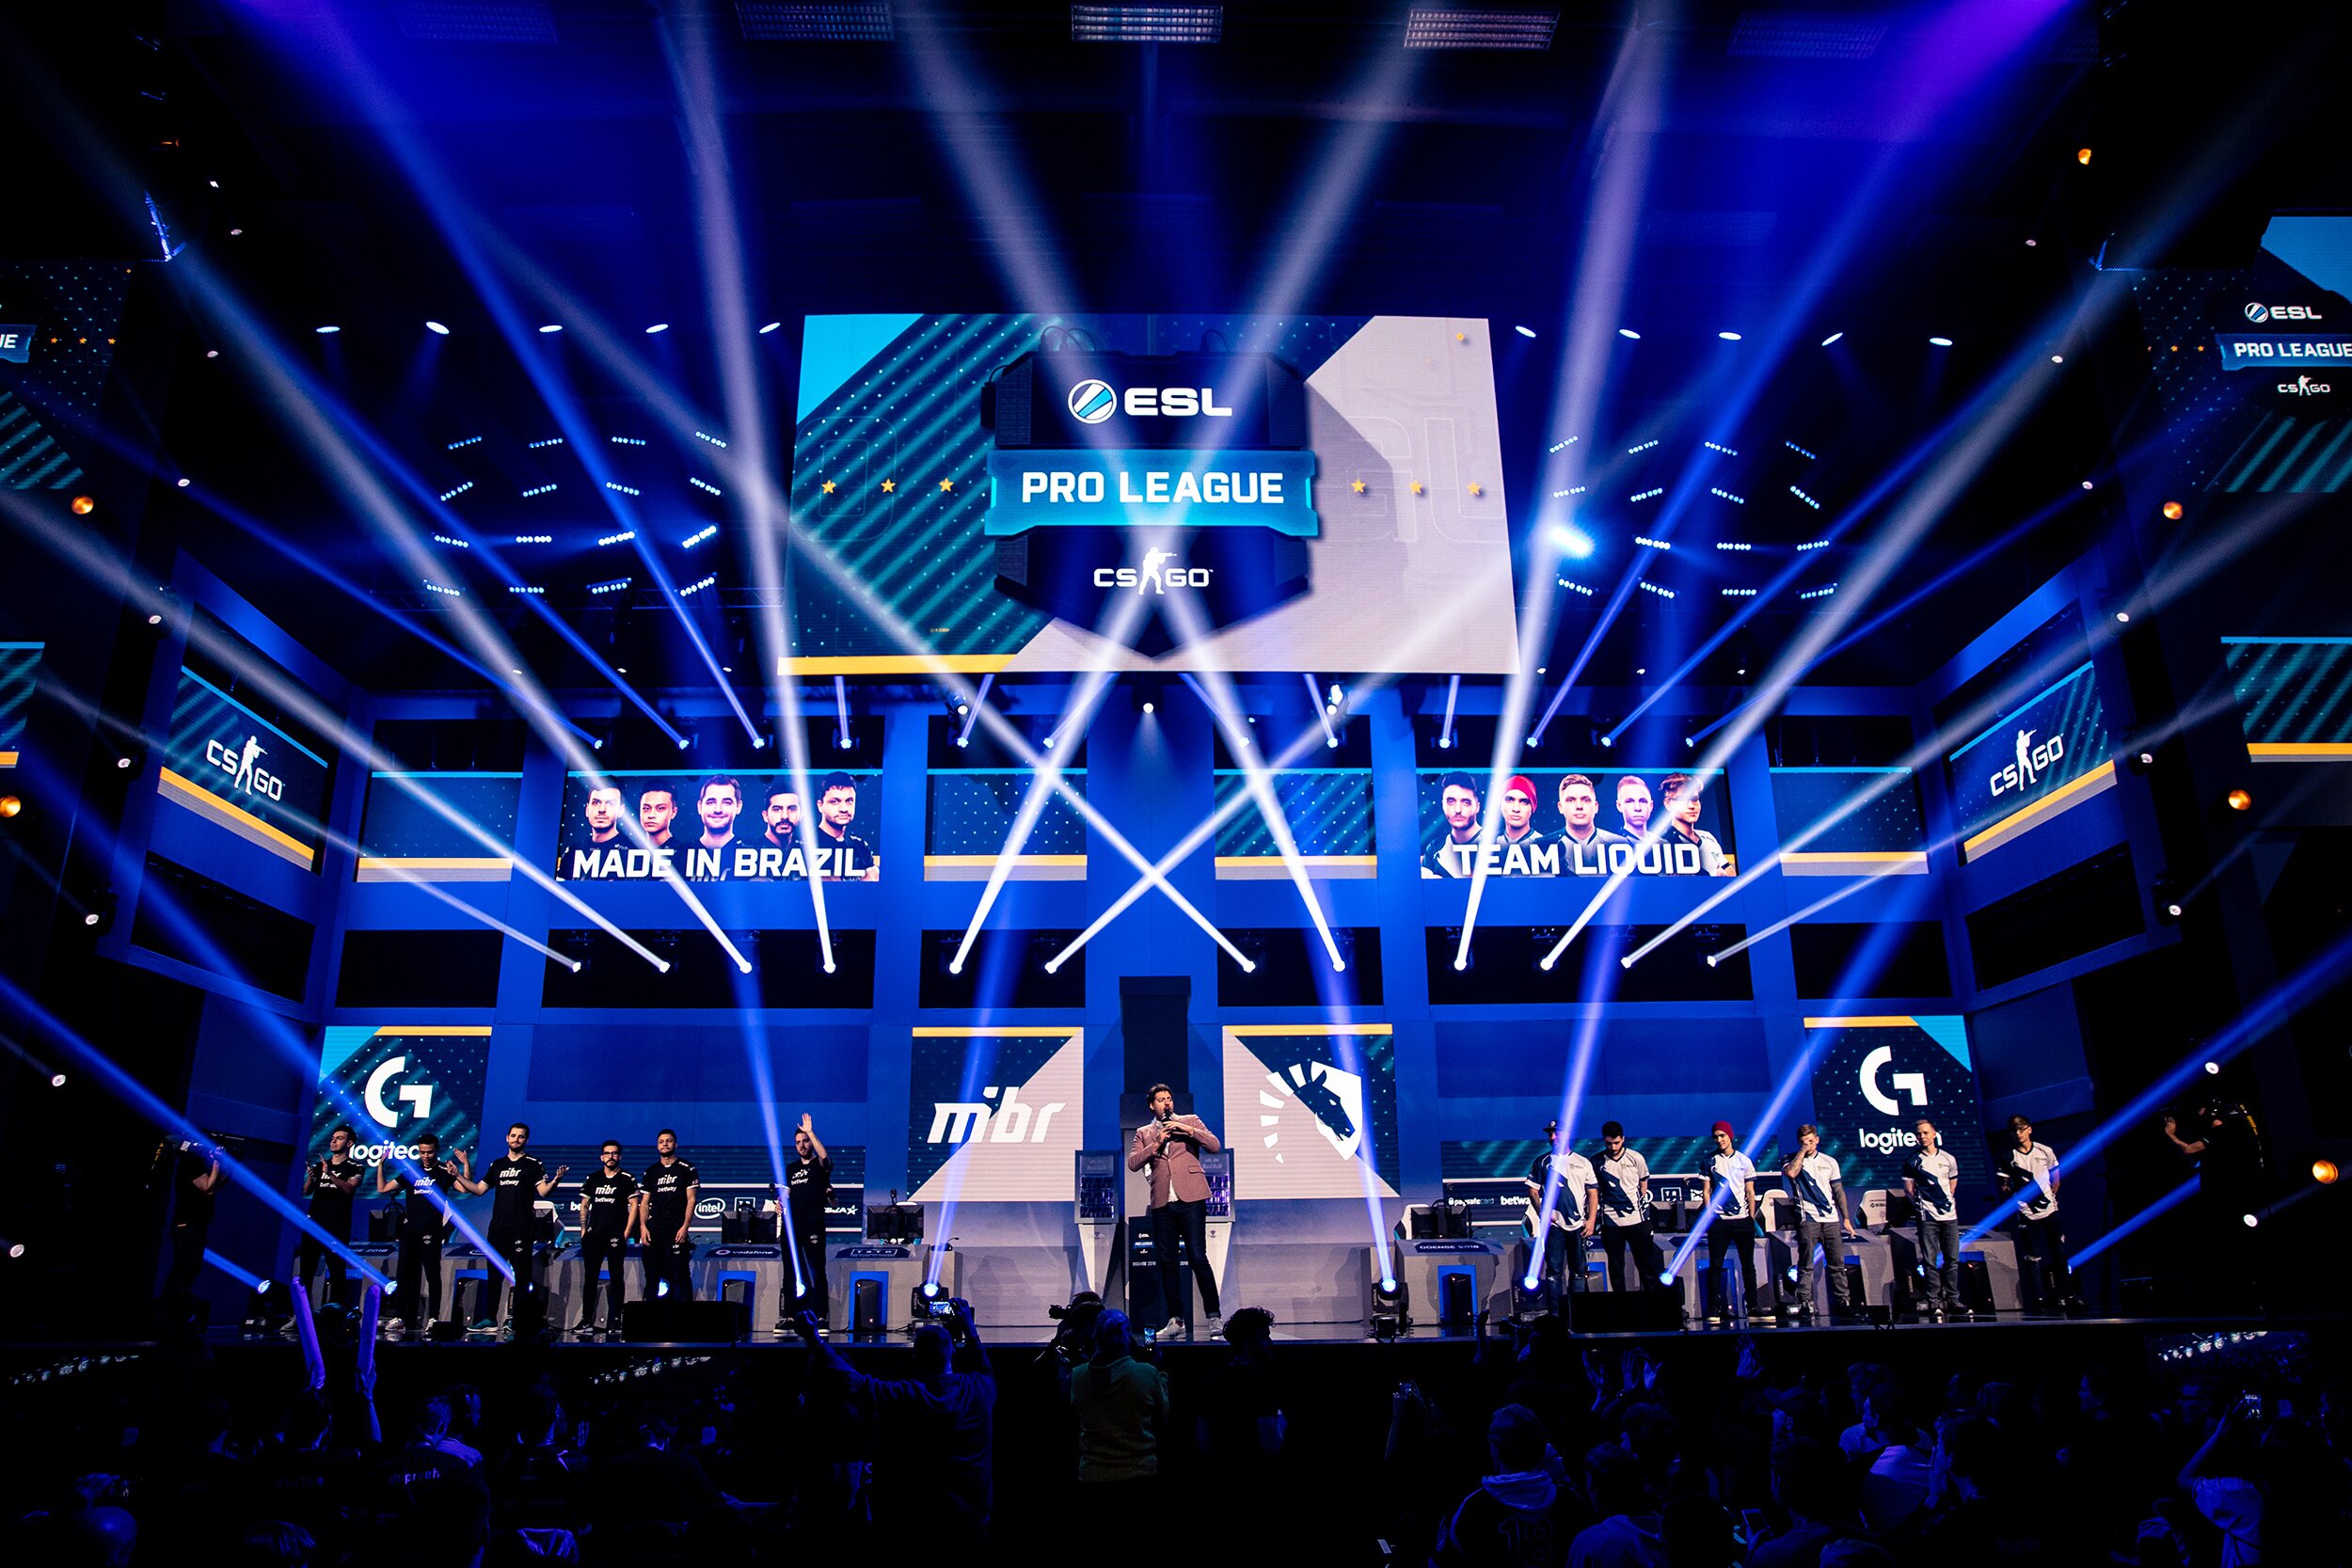 ESL Pro League CSGO has unveiled a new format going into Season 9 which will see a multitude of changes.